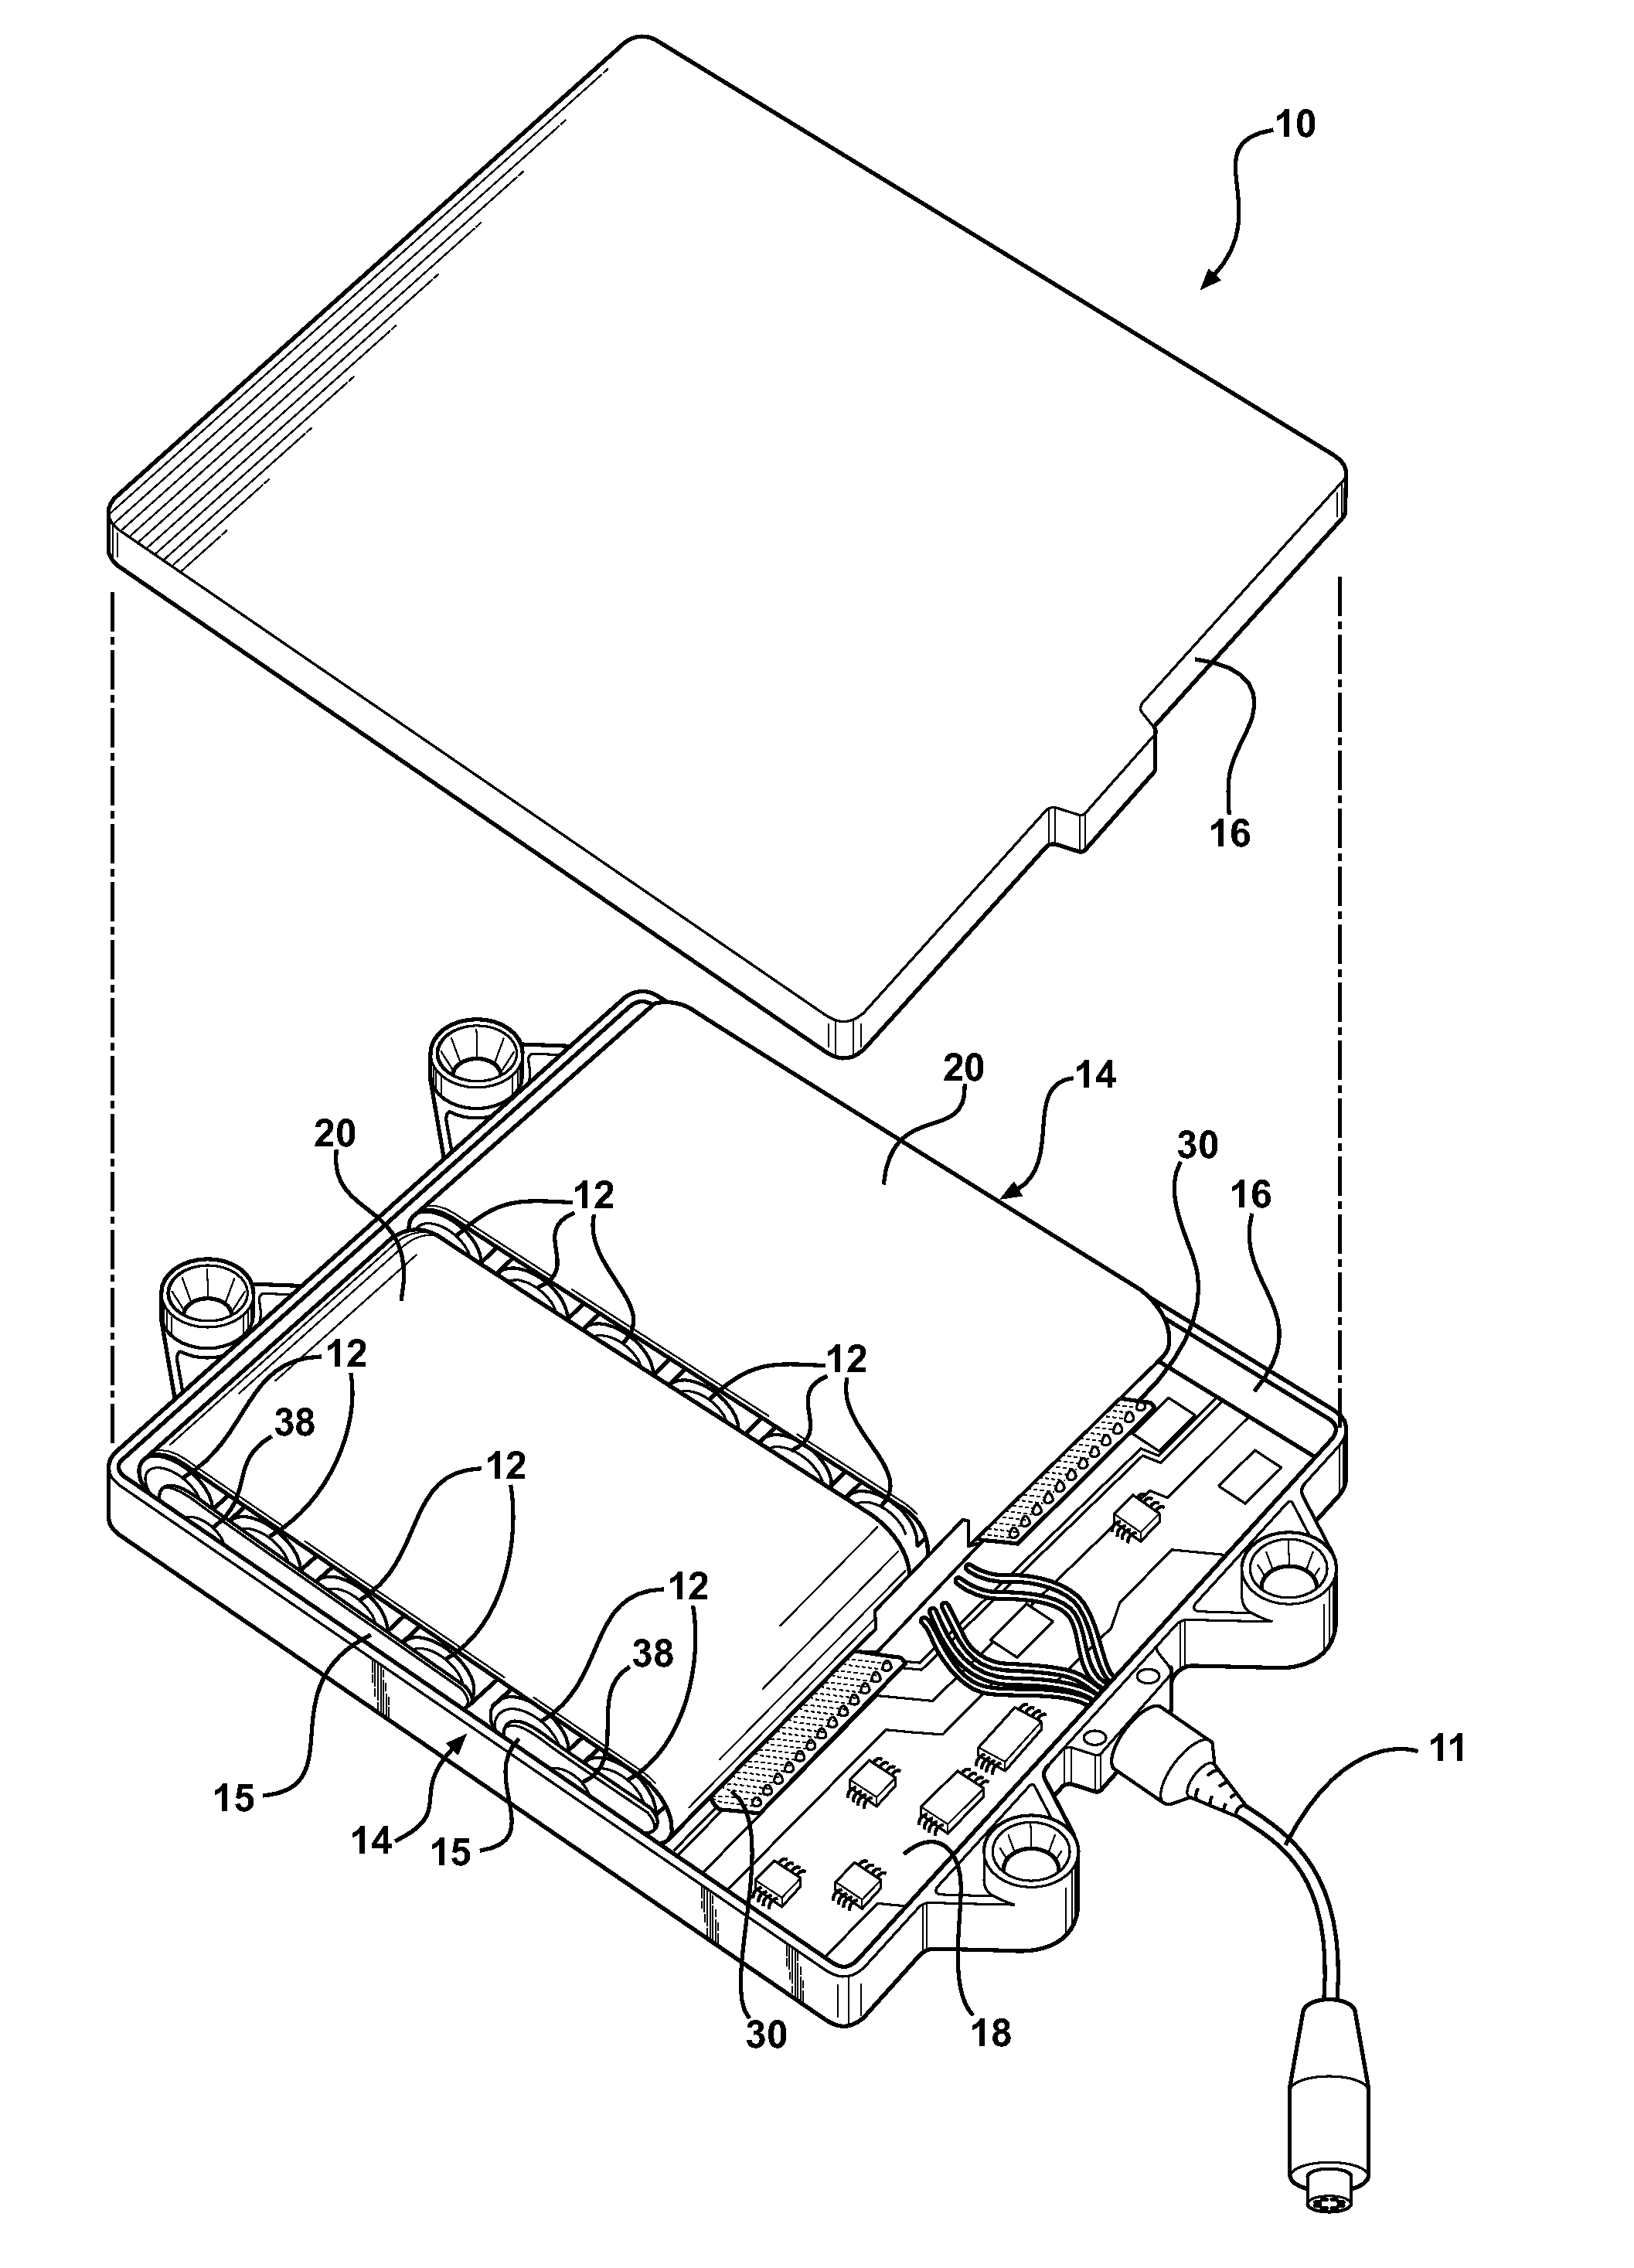 Battery pack assembly with integrated heater